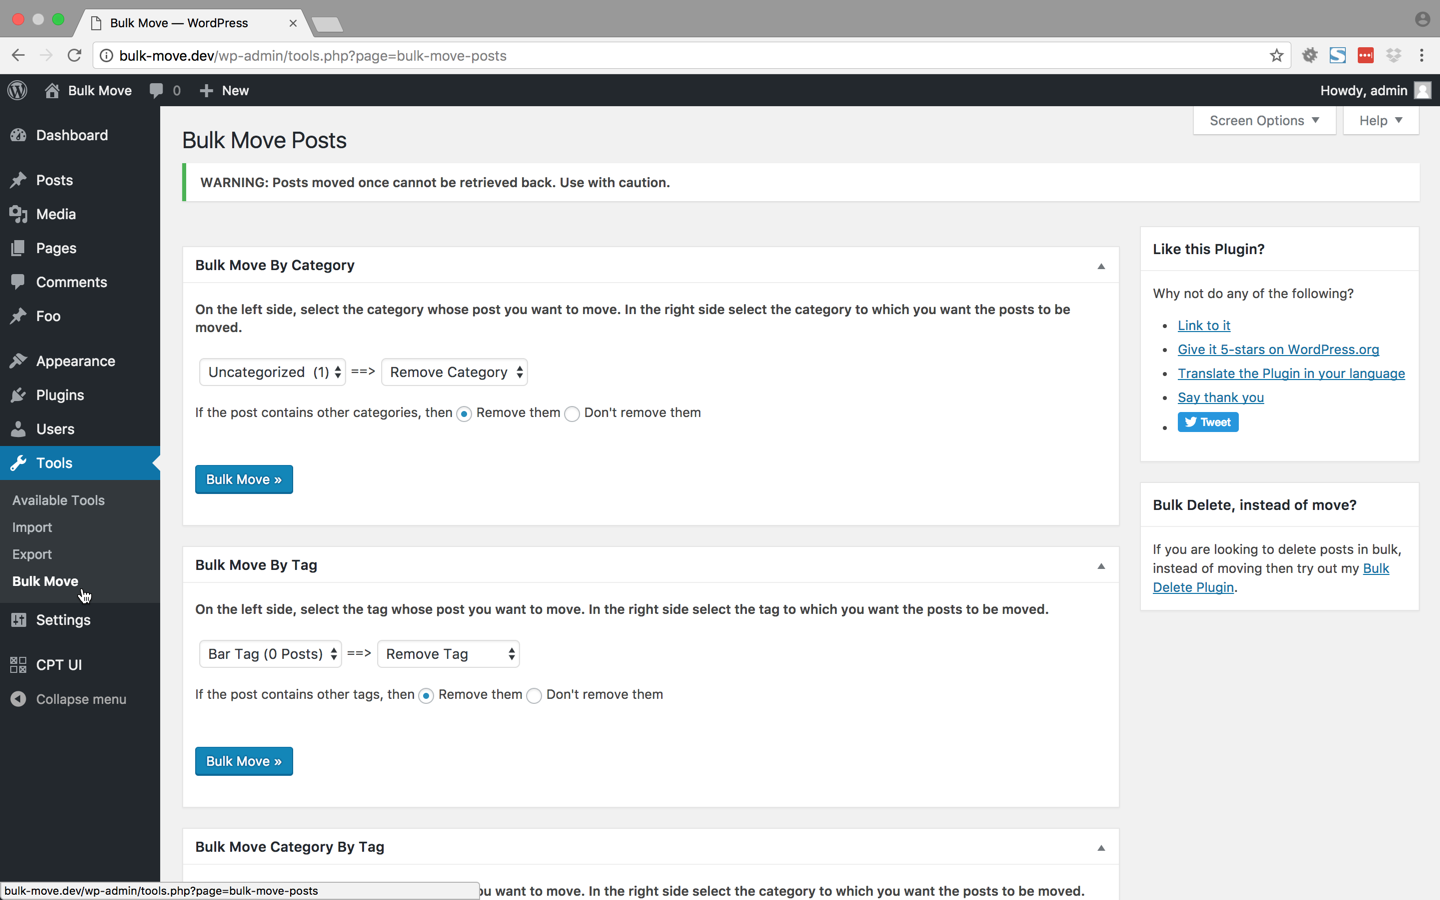 This screenshot shows the Bulk Move Page. You can access the various Bulk Move modules here.